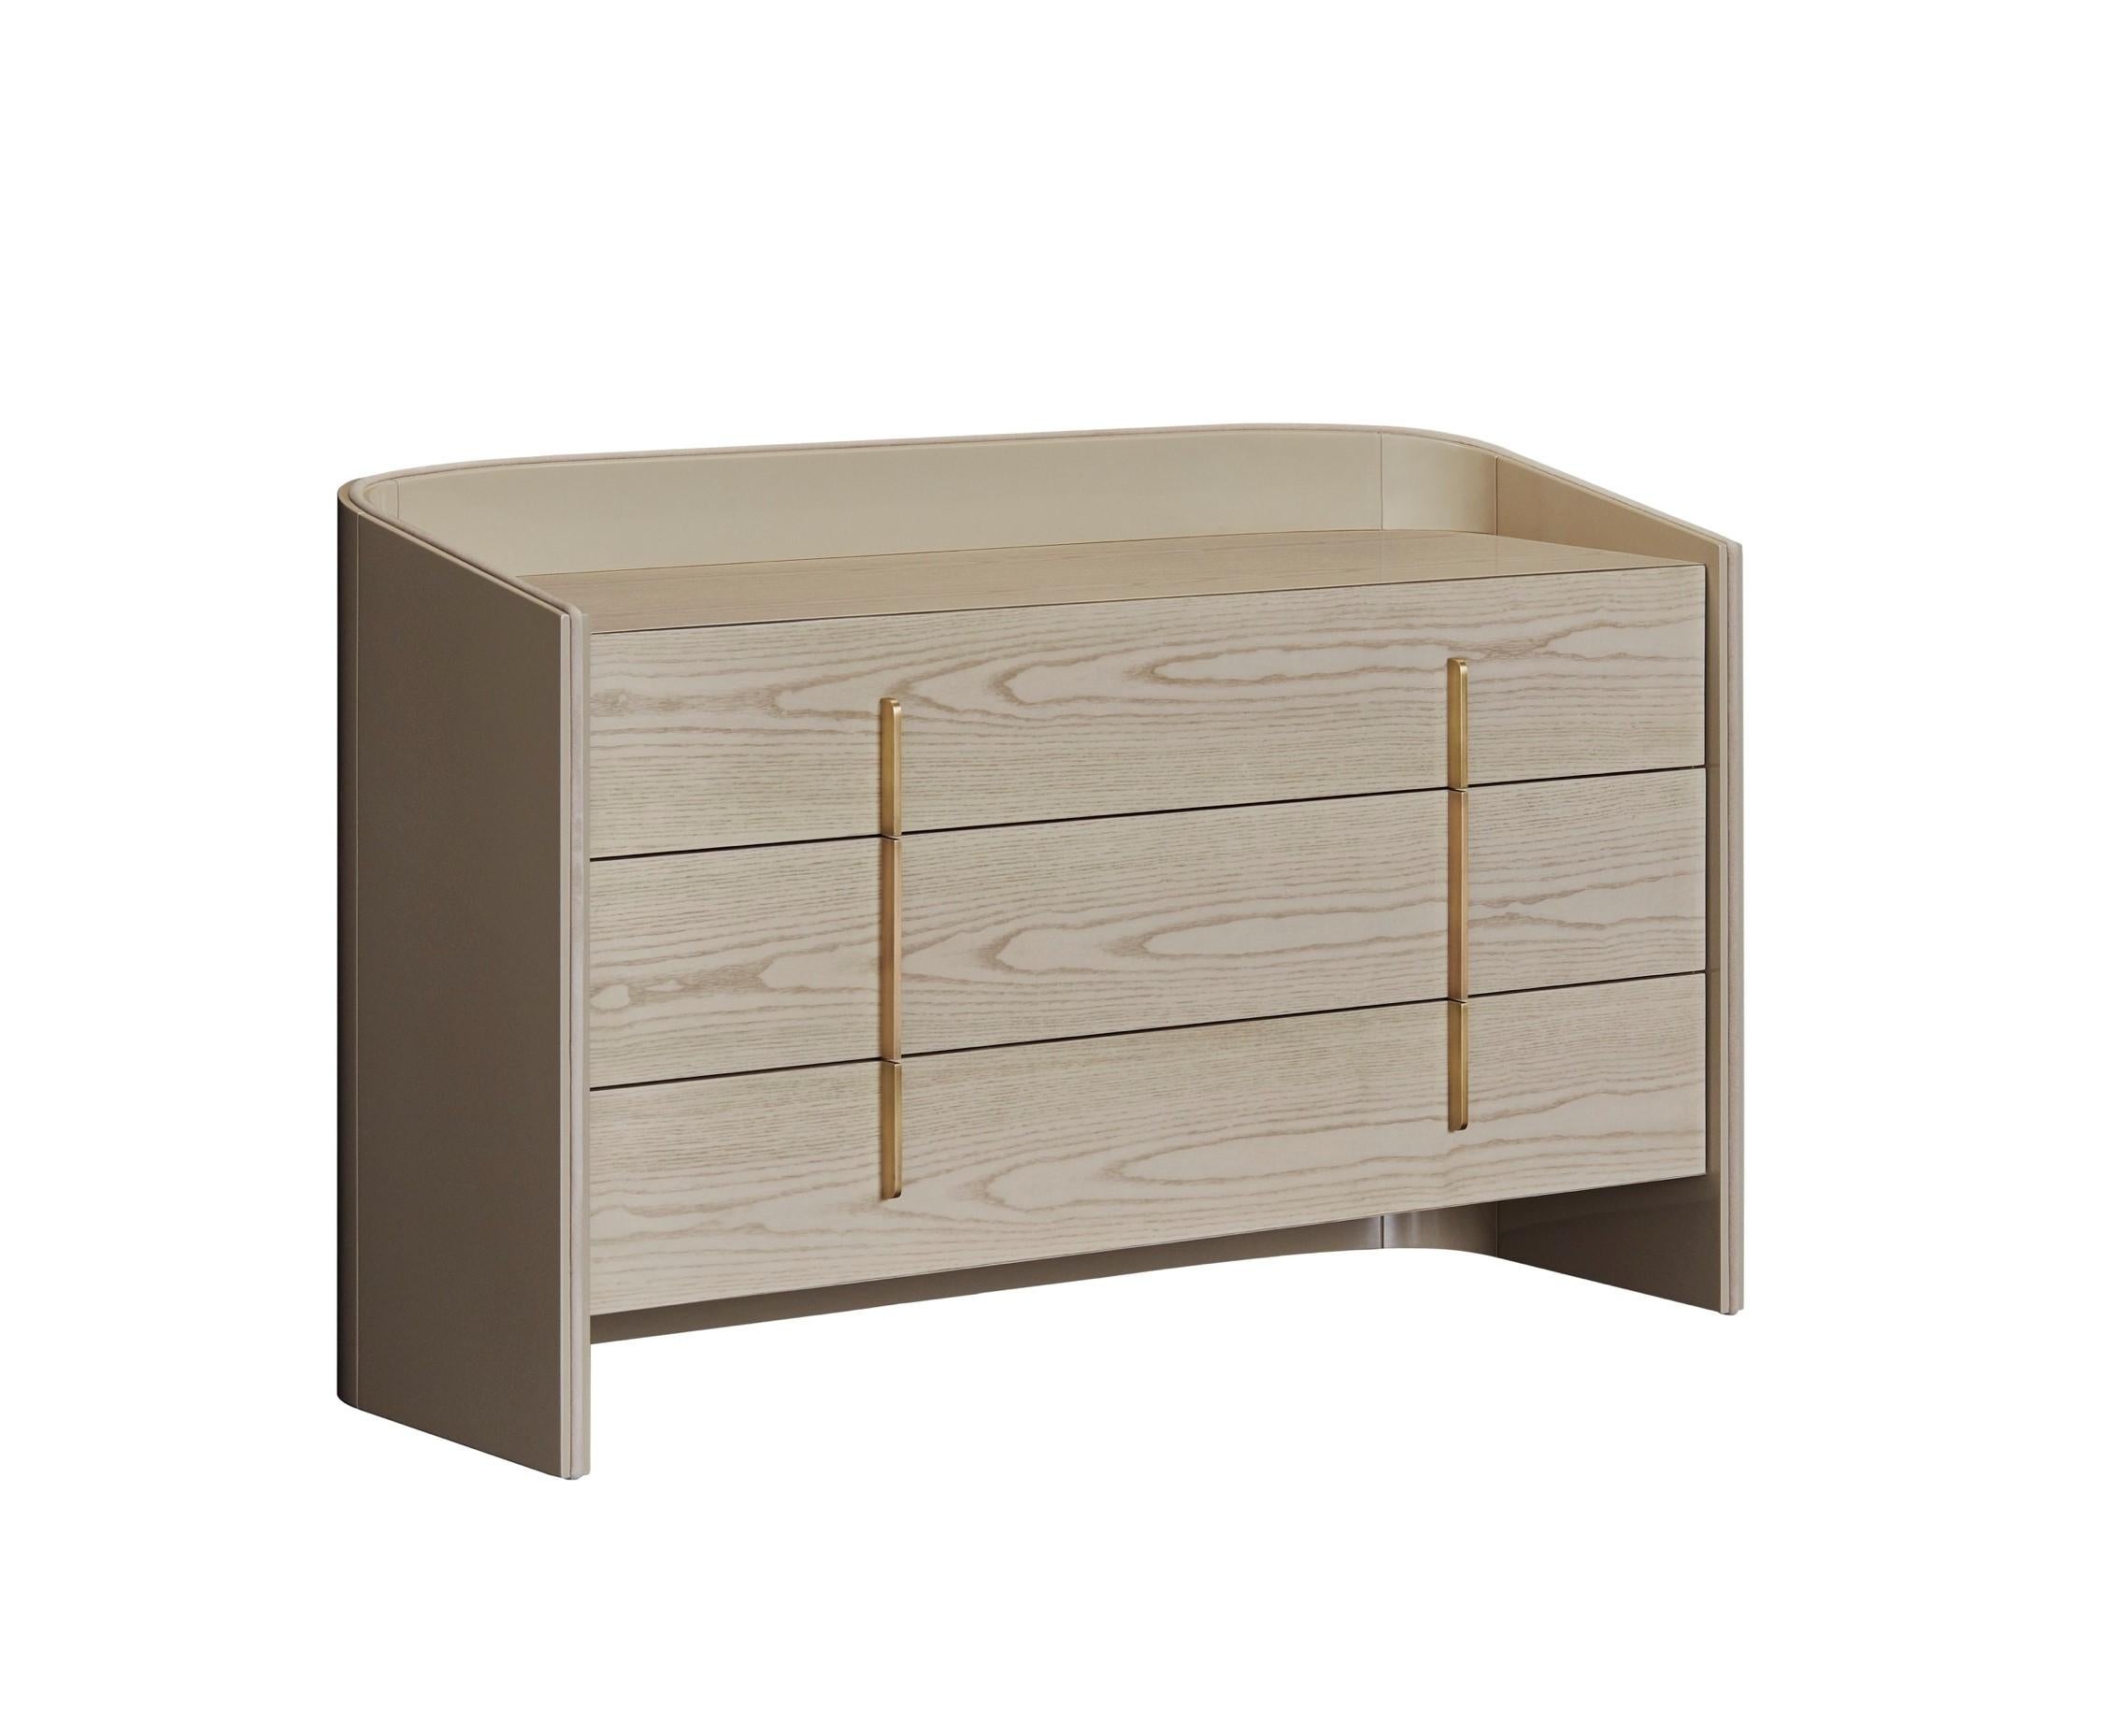 Elegant and sophisticated, the CORALINA chest of drawers is made of wood and allows the combination of different finishes in the drawers and the back structure, suitable for any needs and design tastes.‎ With metal handles, in brass or stainless